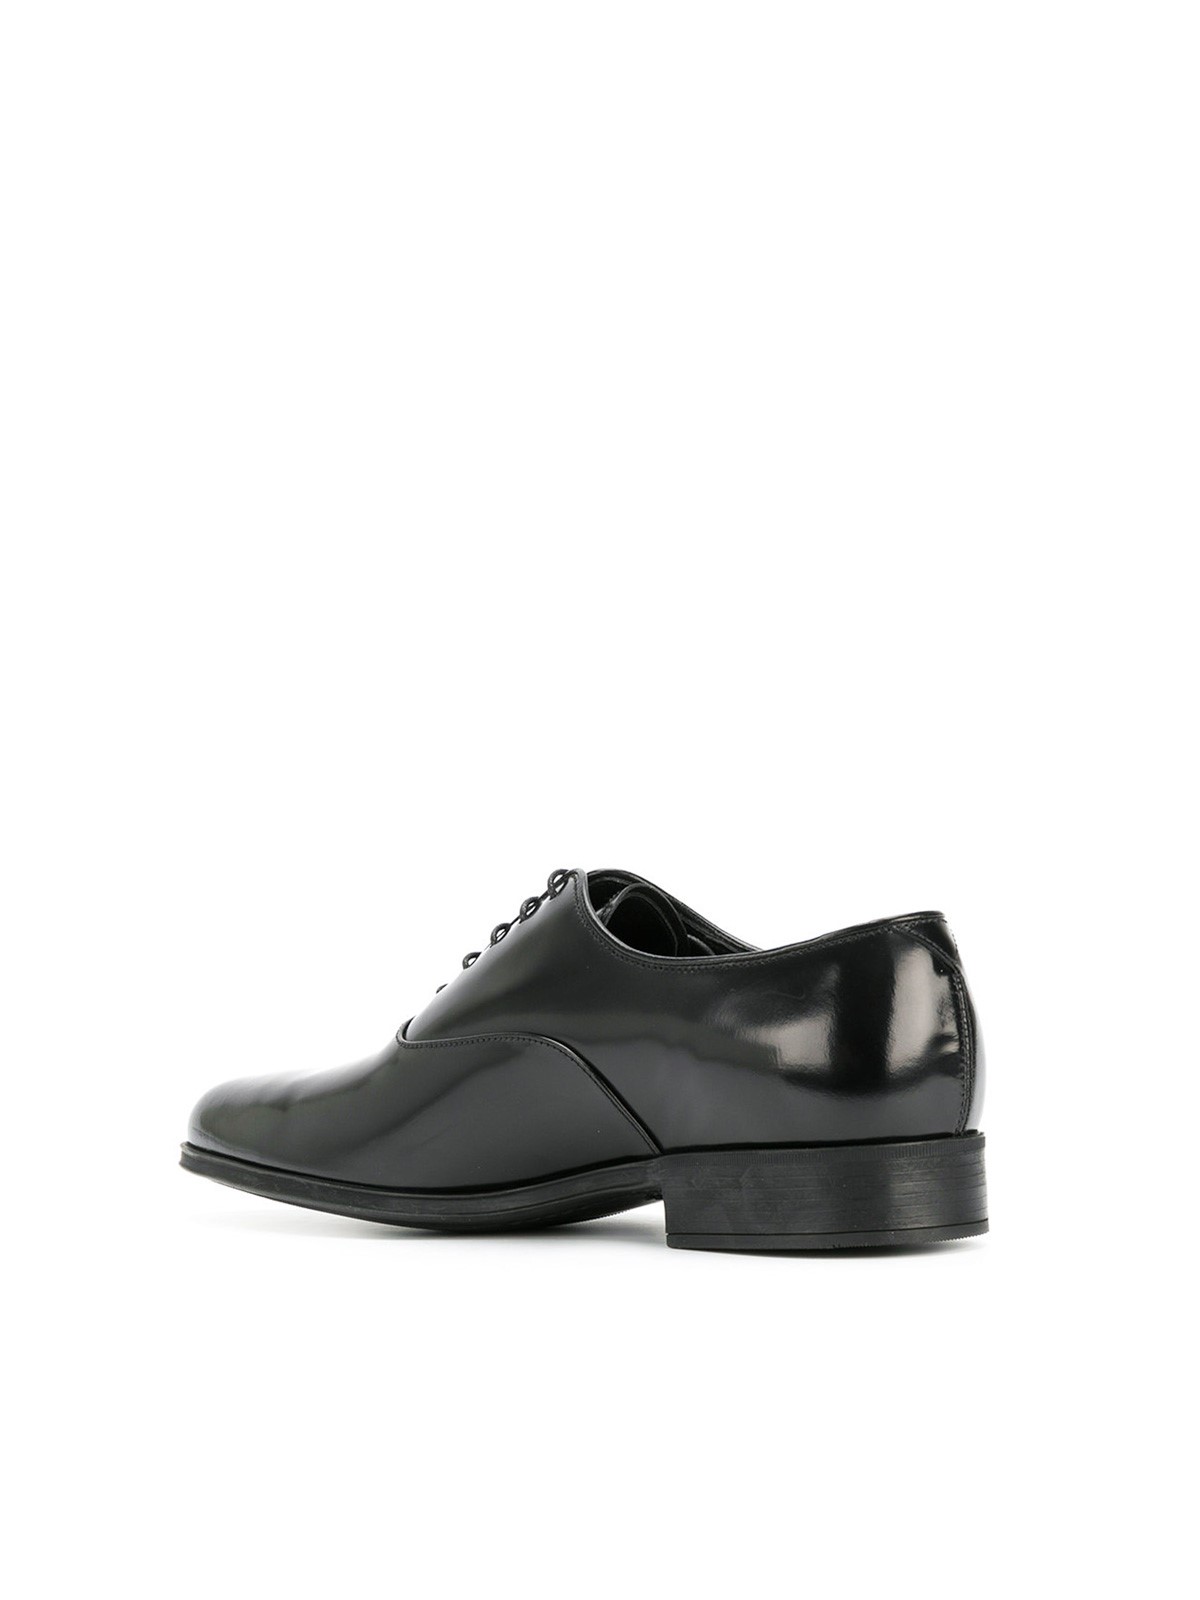 prada OXFORDS LACE-UP SHOES available on montiboutique.com - 21956